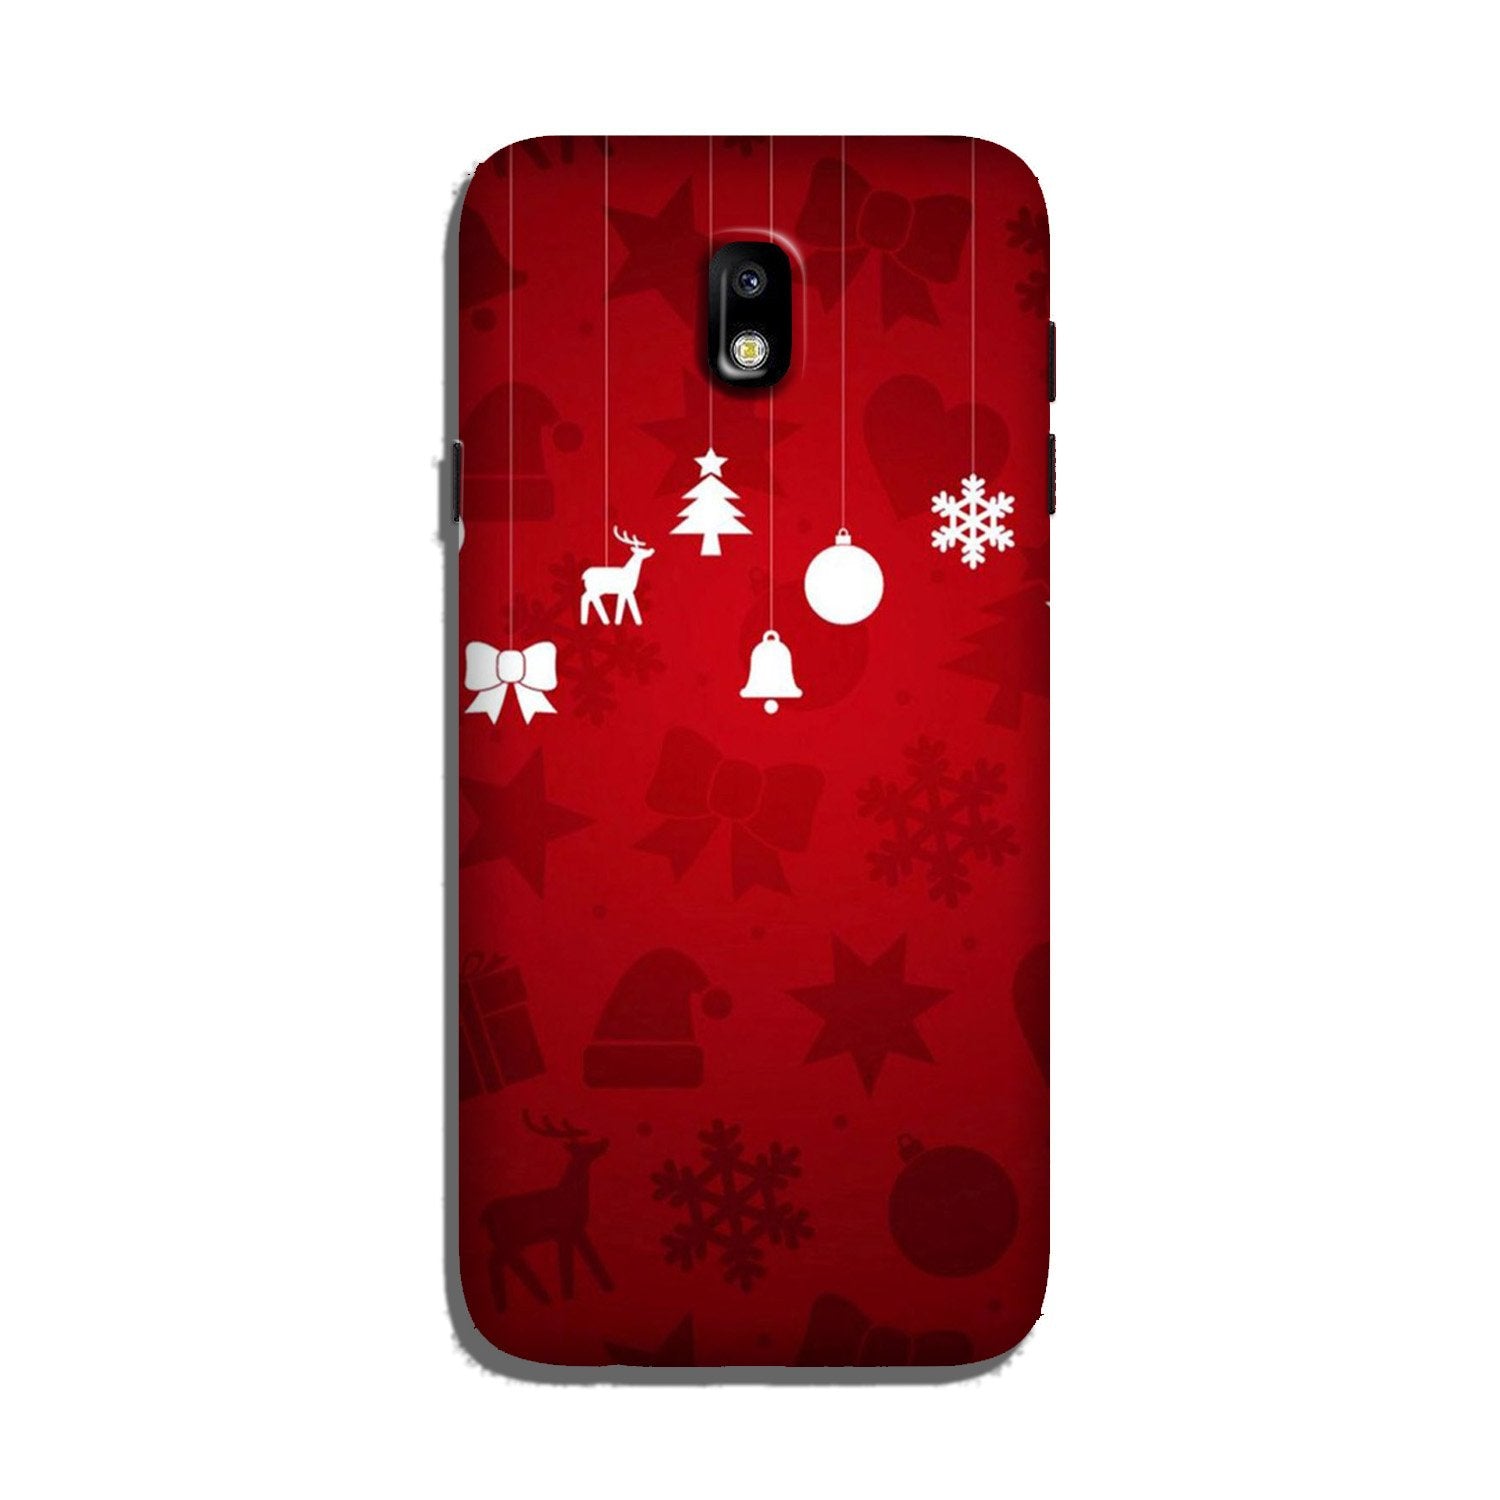 Christmas Case for Galaxy J3 Pro